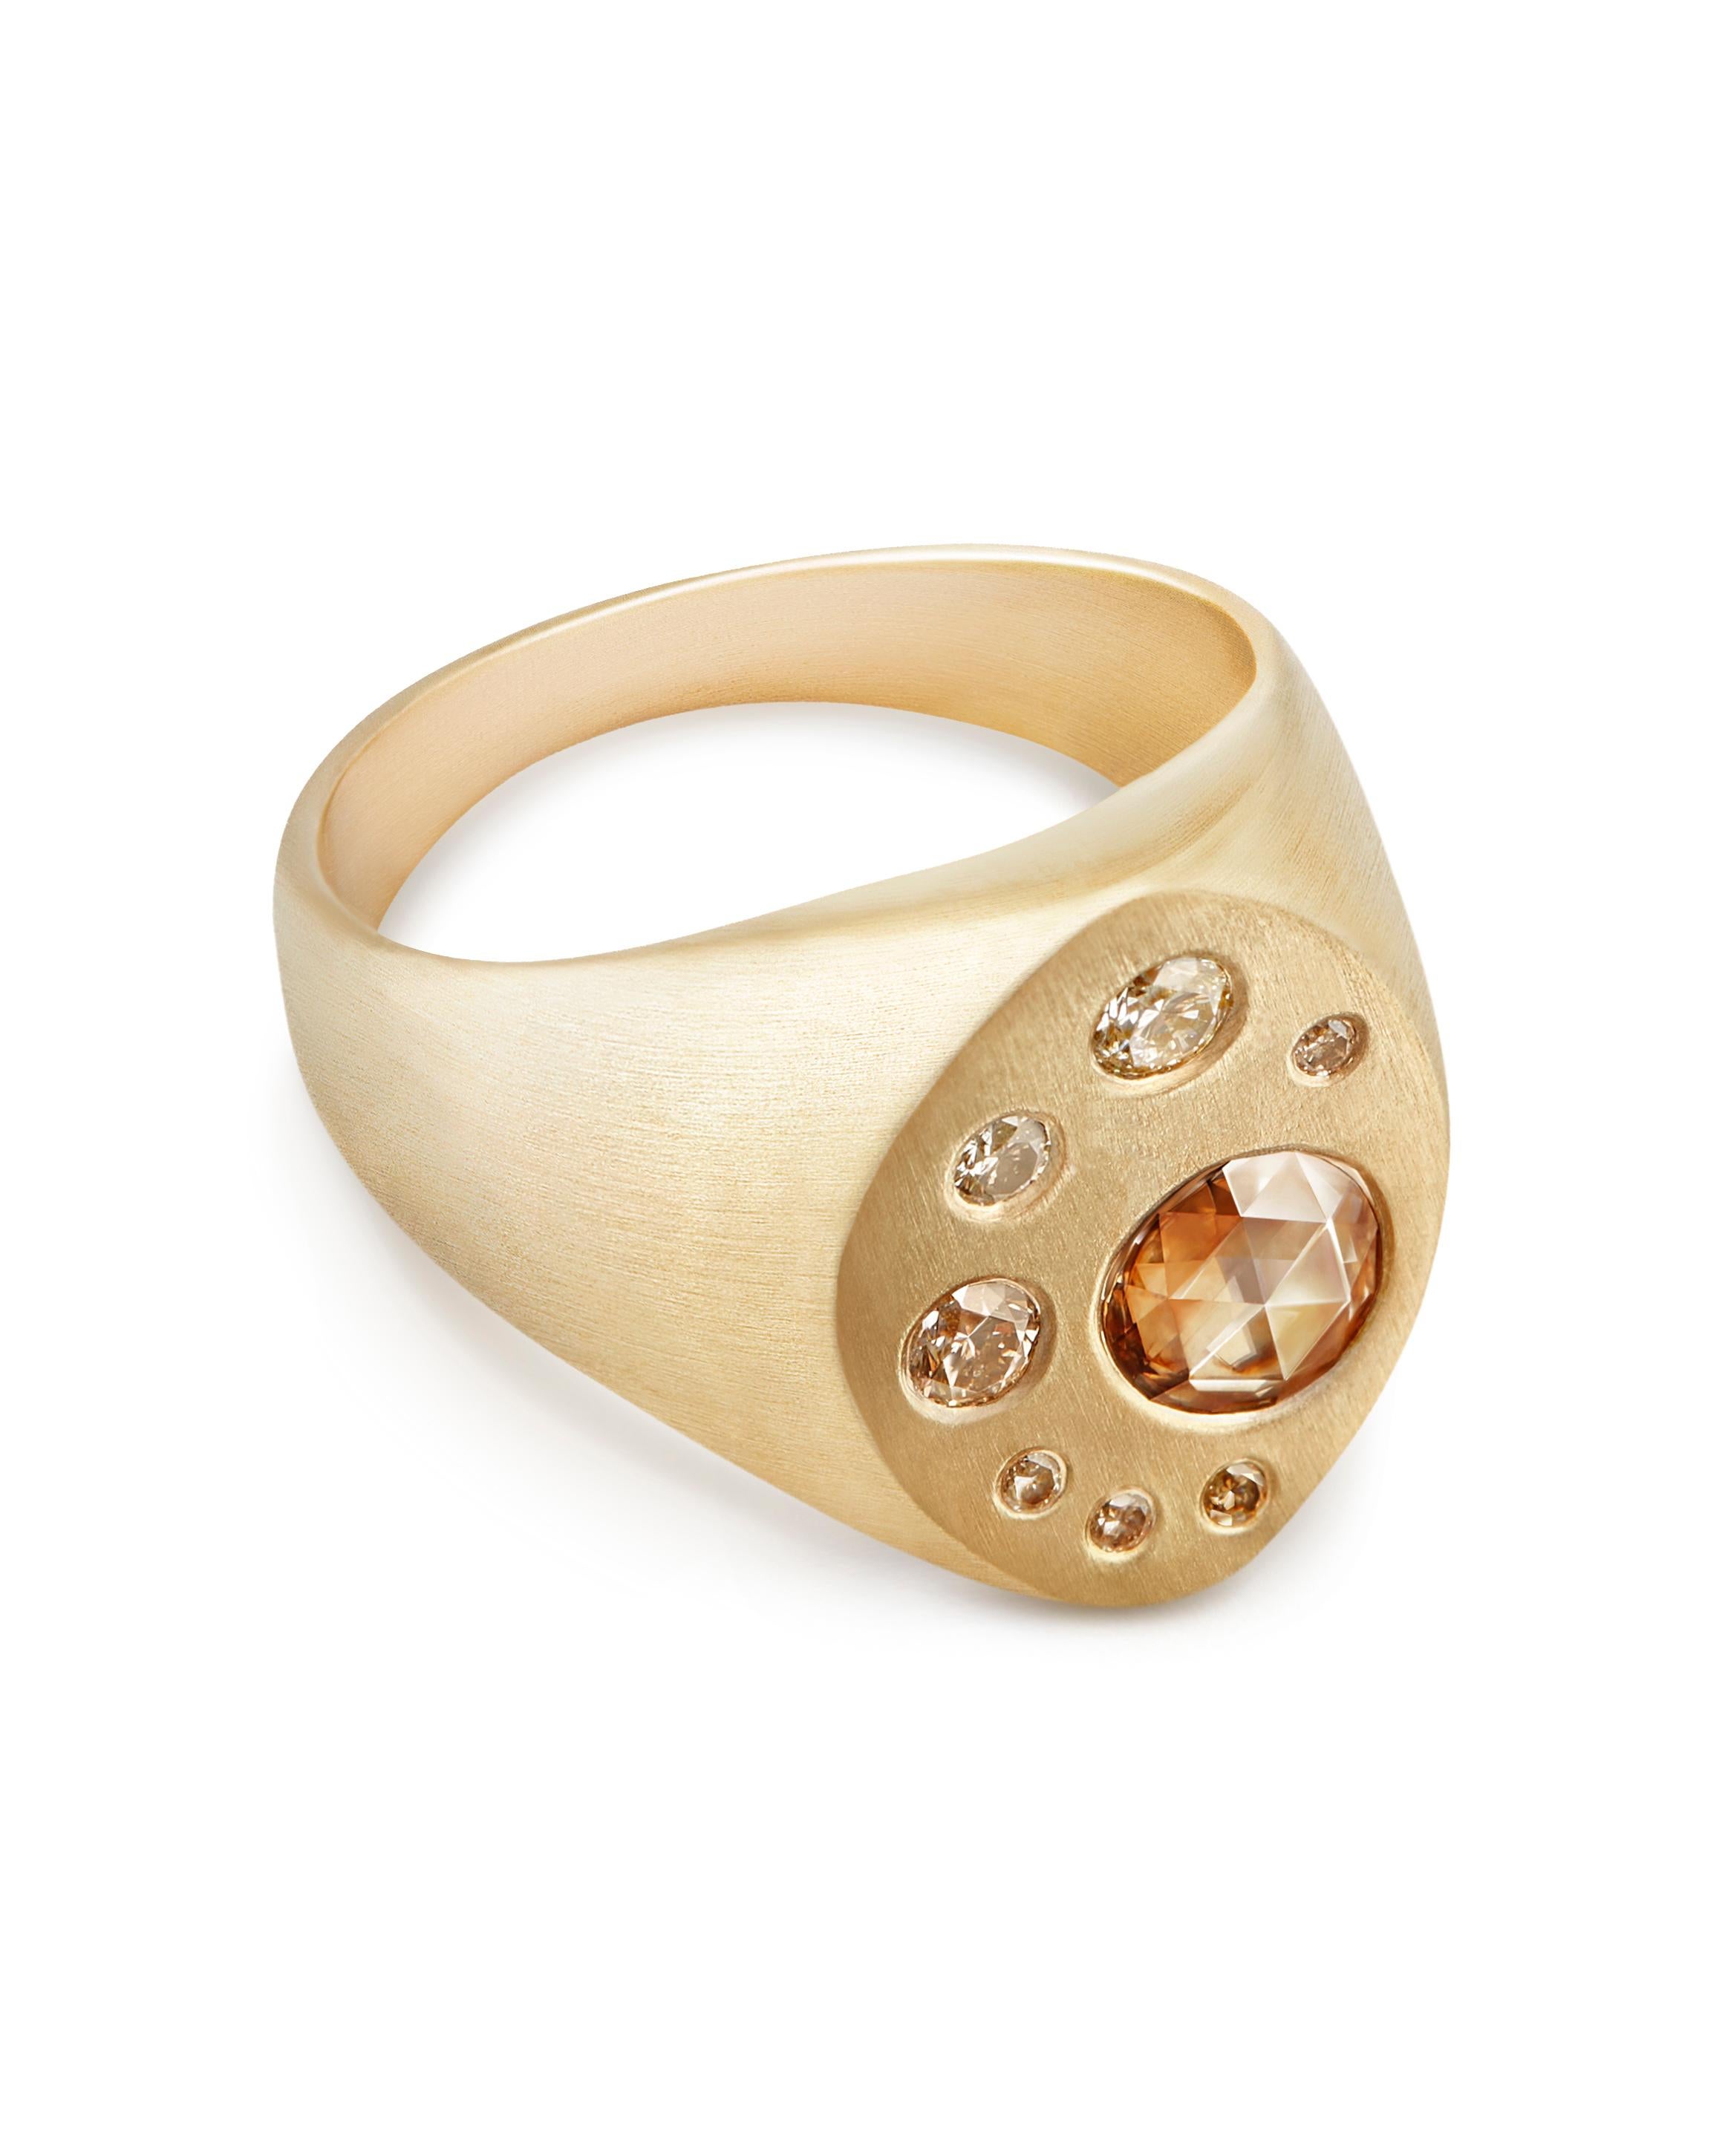 This contemporary take on the classic signet ring is crafted from solid 9-carat yellow gold and features eight diamonds ranging in size and color from pale champagne to cognac and a brushed finish to the gold.  The largest feature stone is a rustic